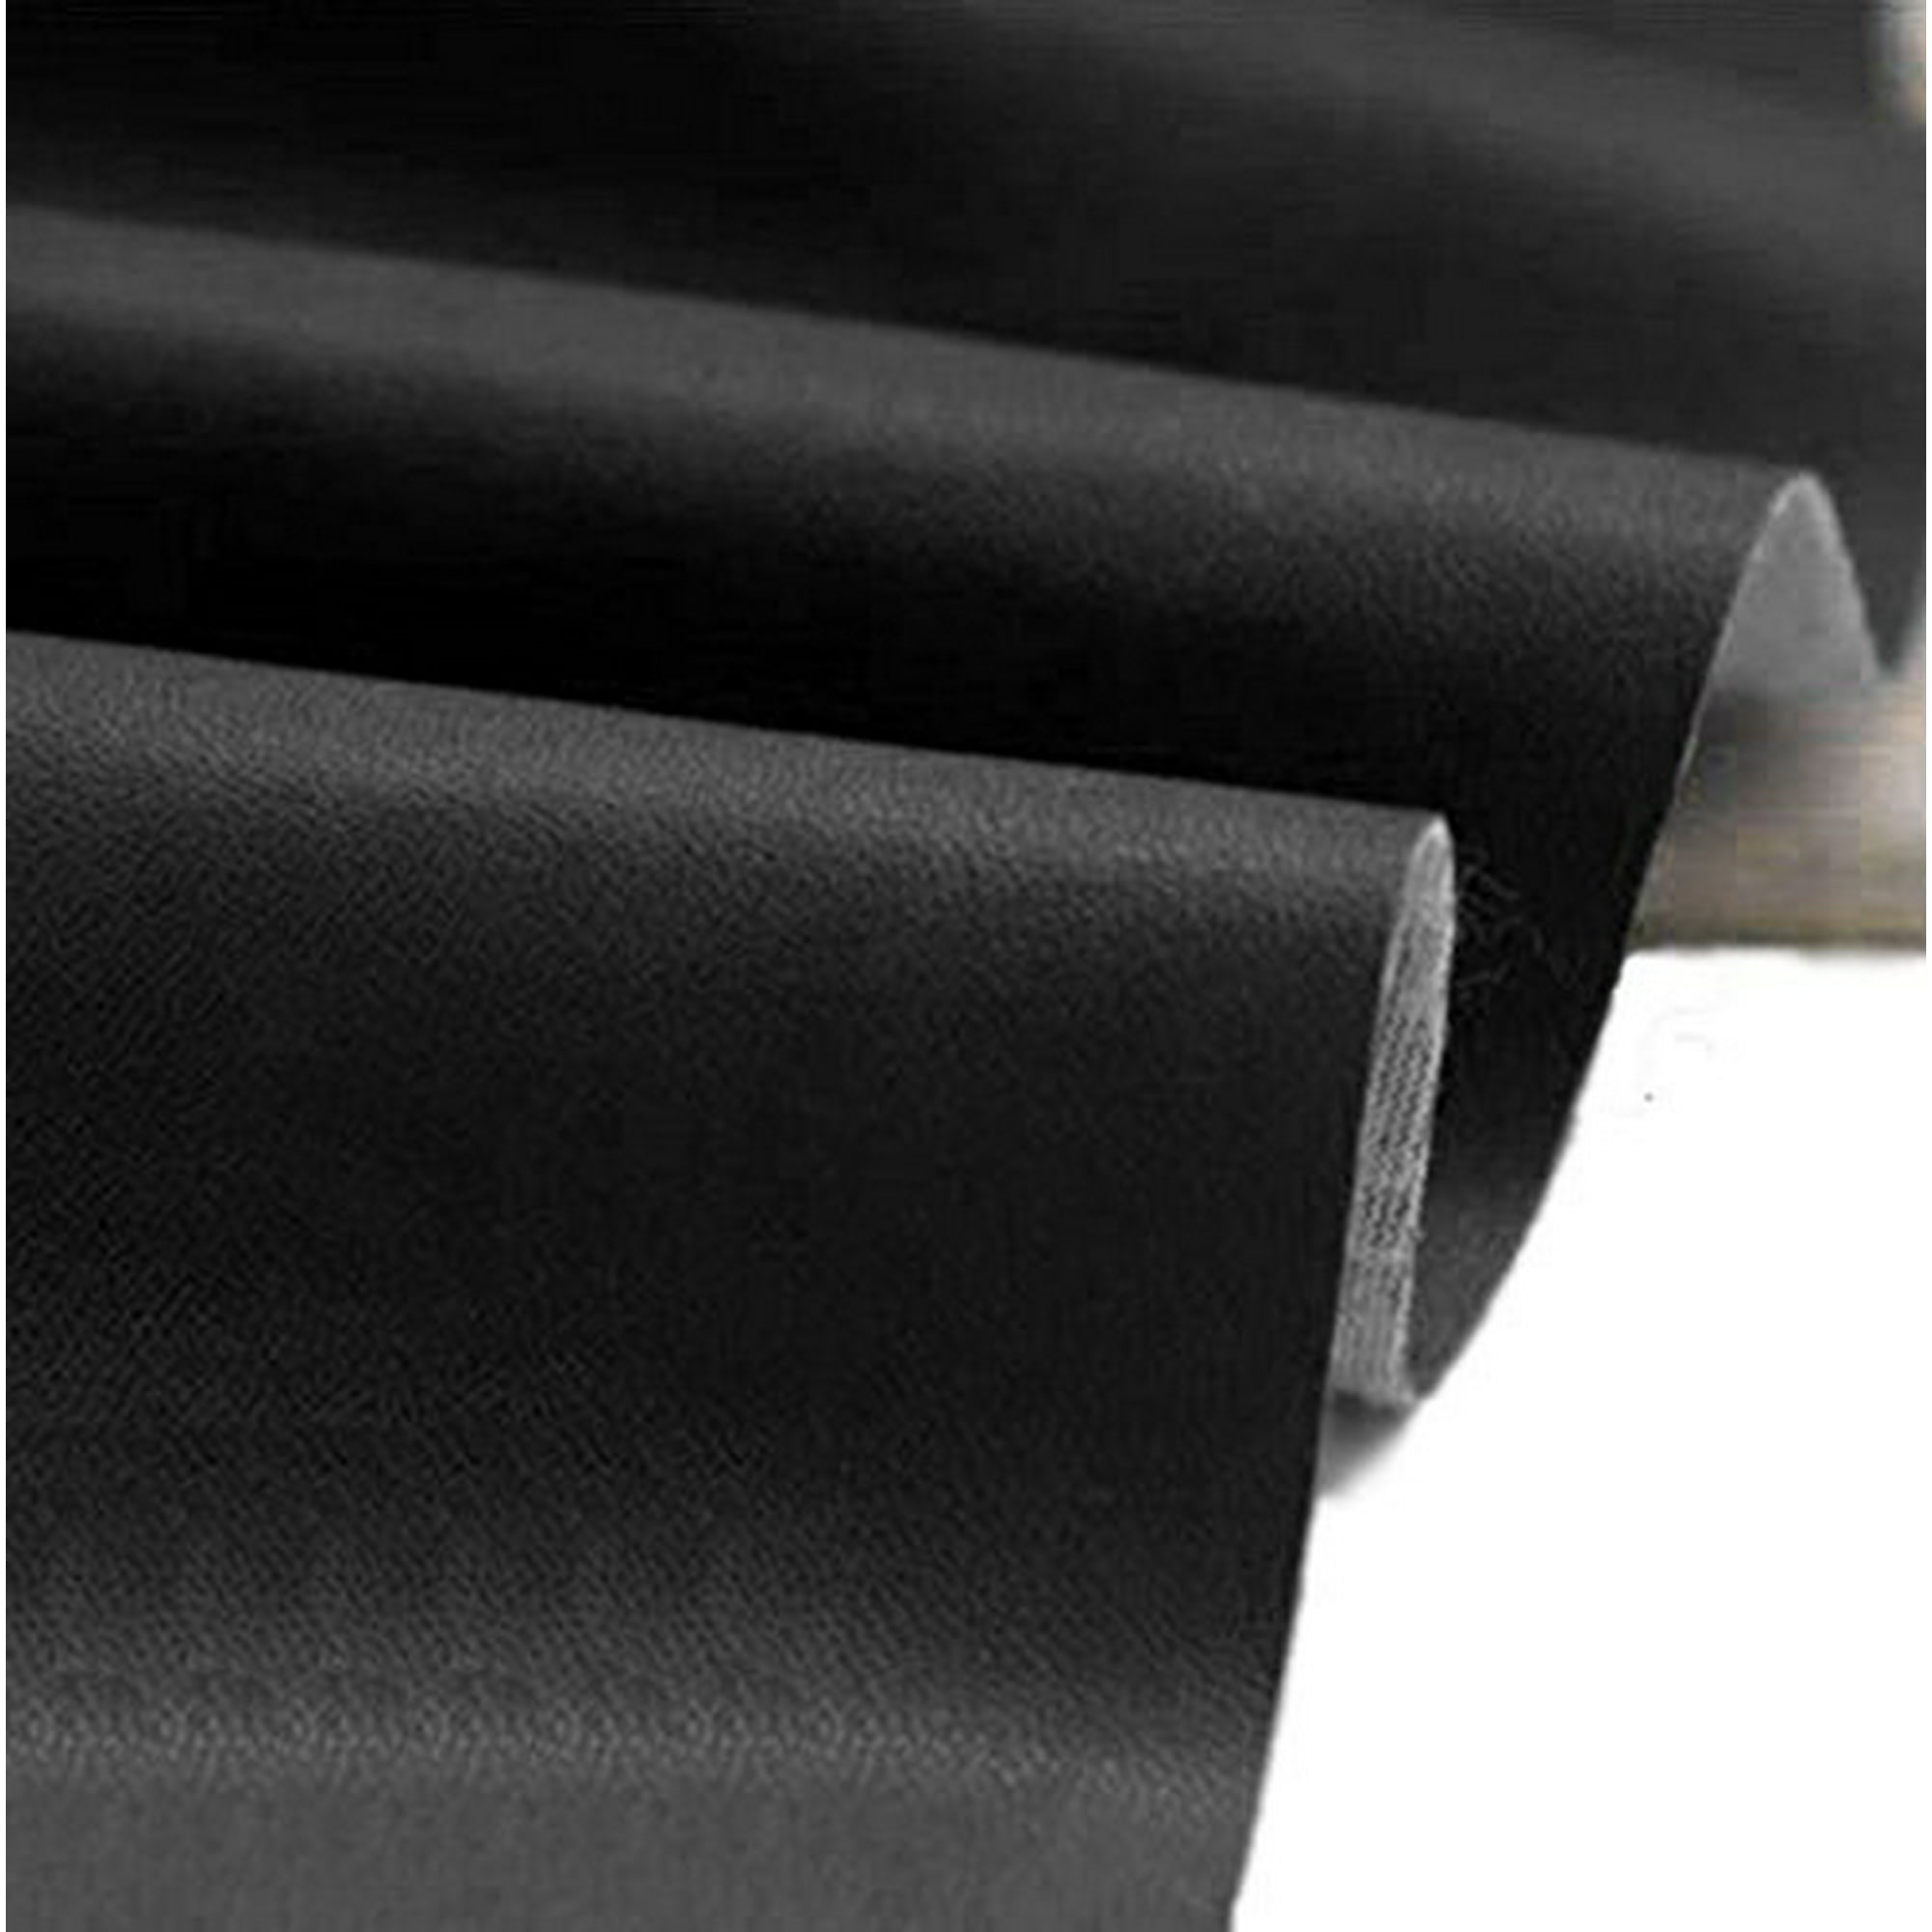 Pvc Vinyl Upholstery Fabric, Black Leather Fabric For Upholstery